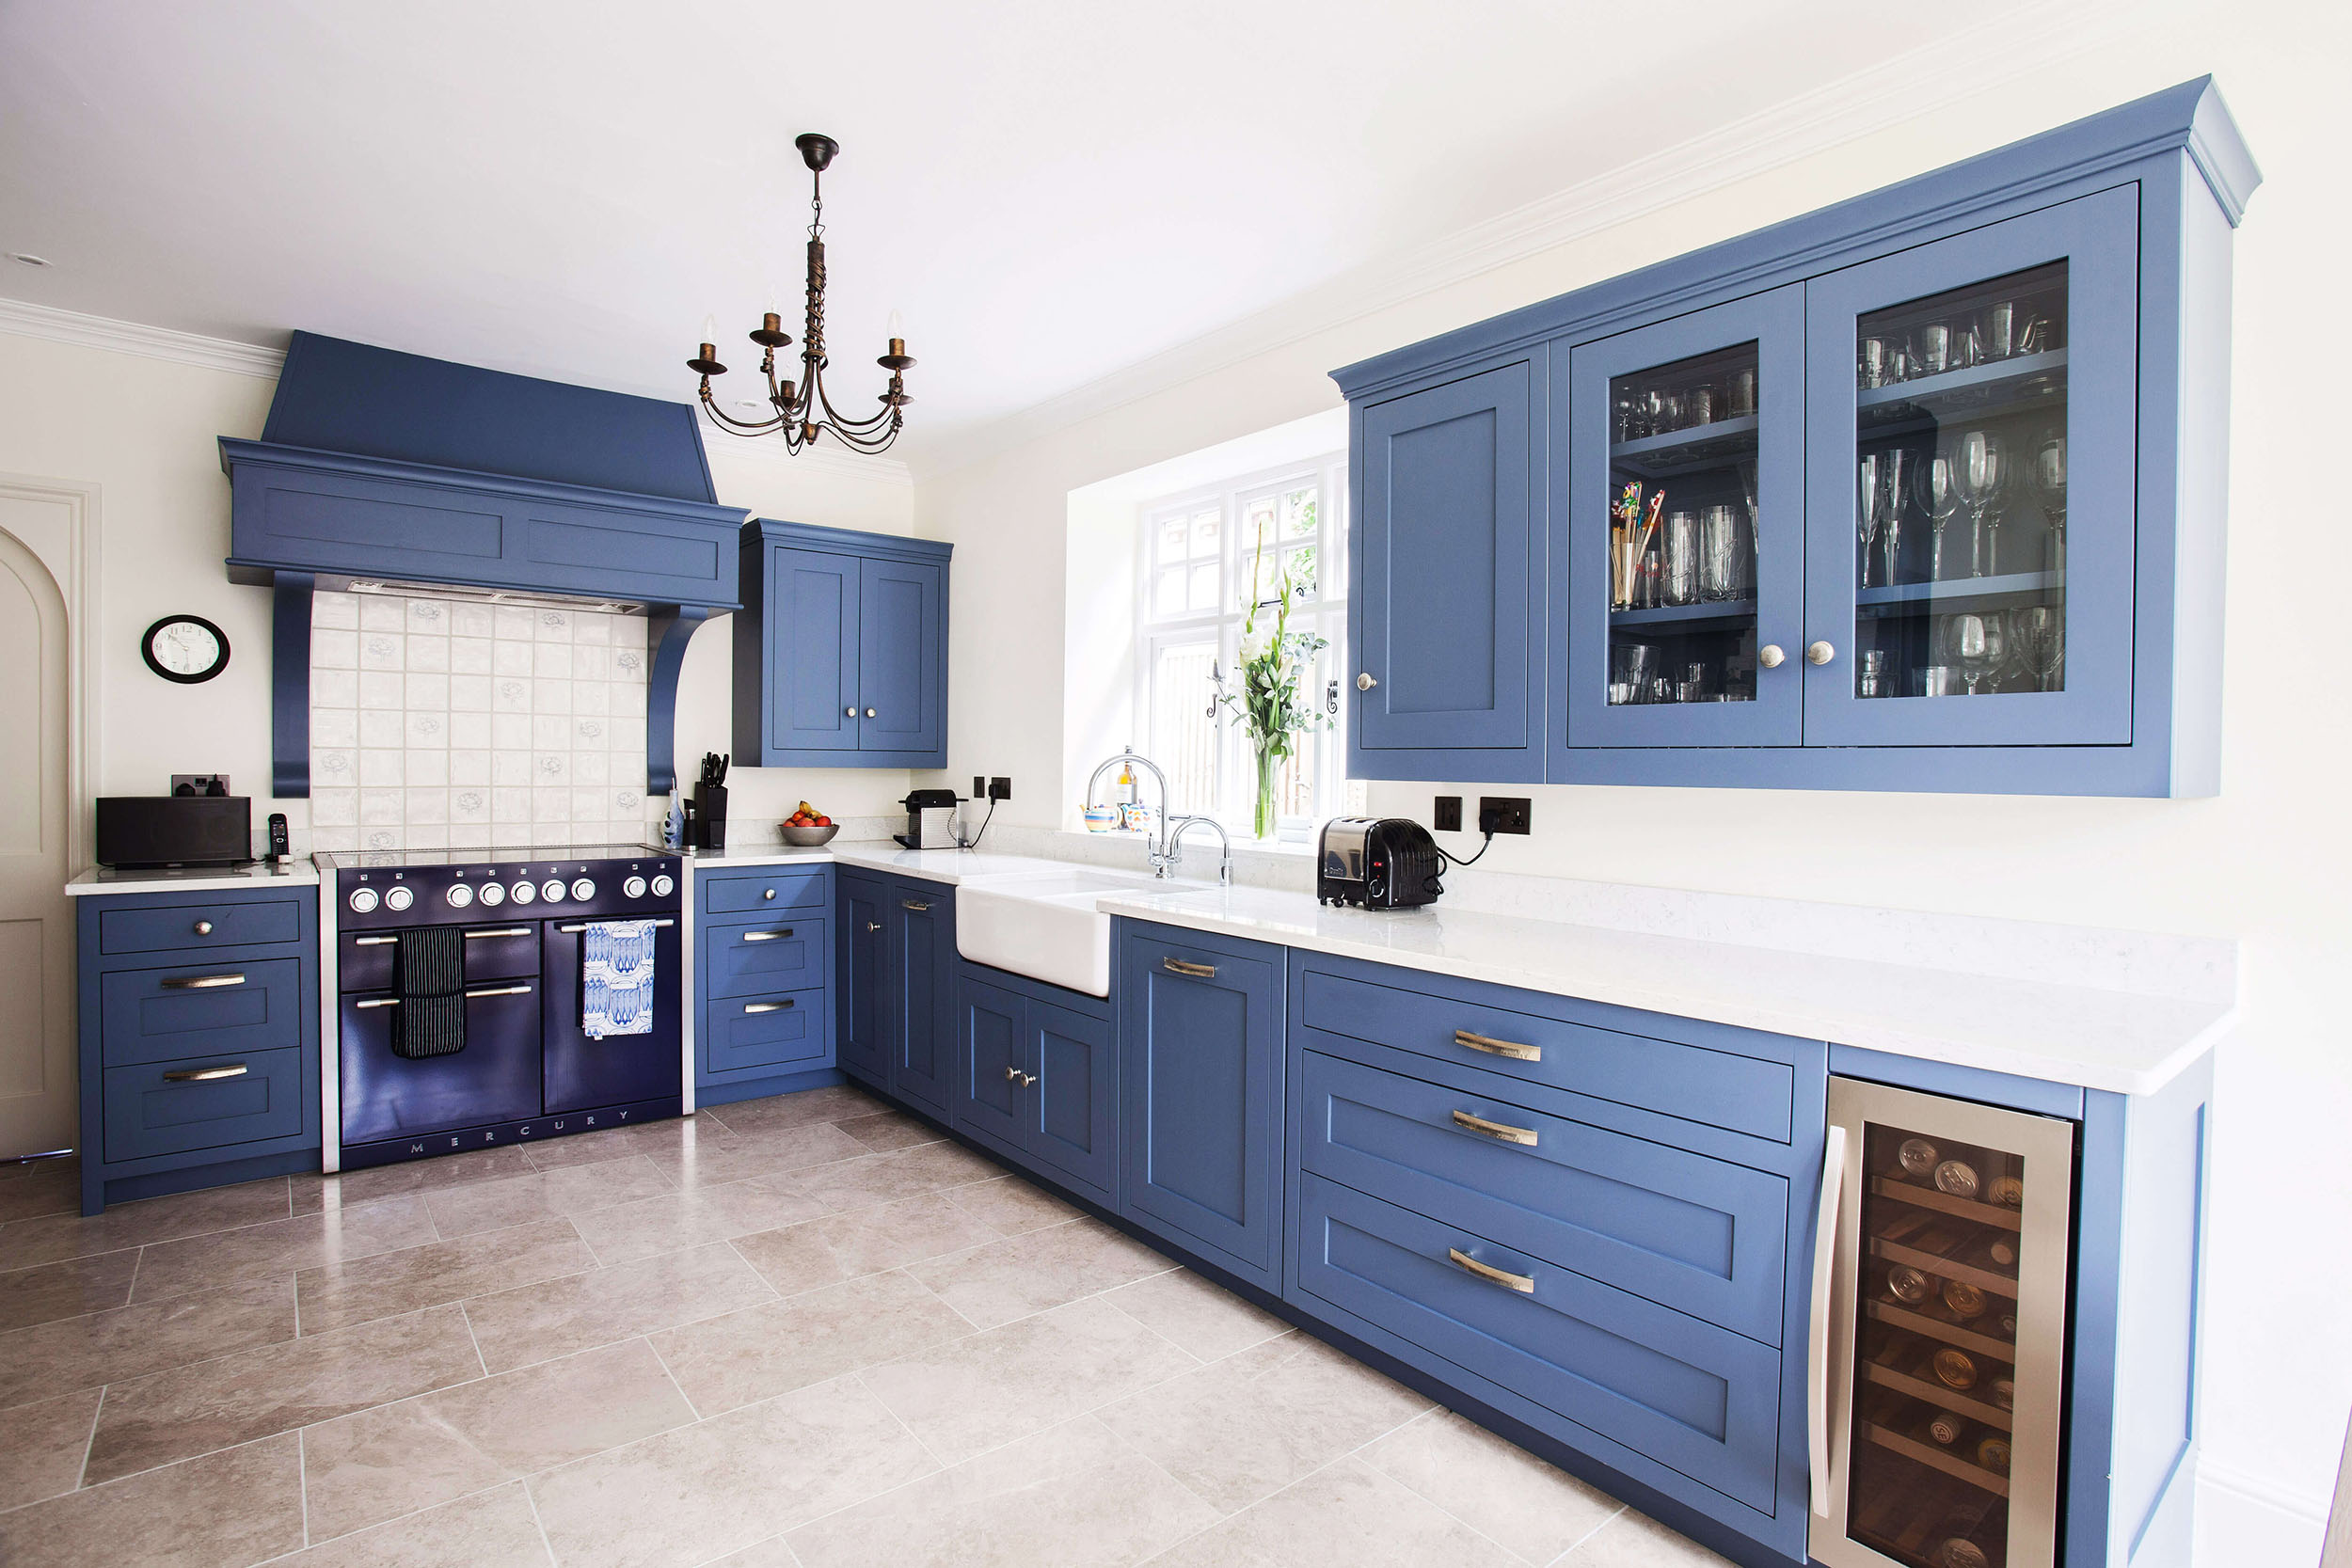 Choosing A Kitchen Layout That Is Right For You